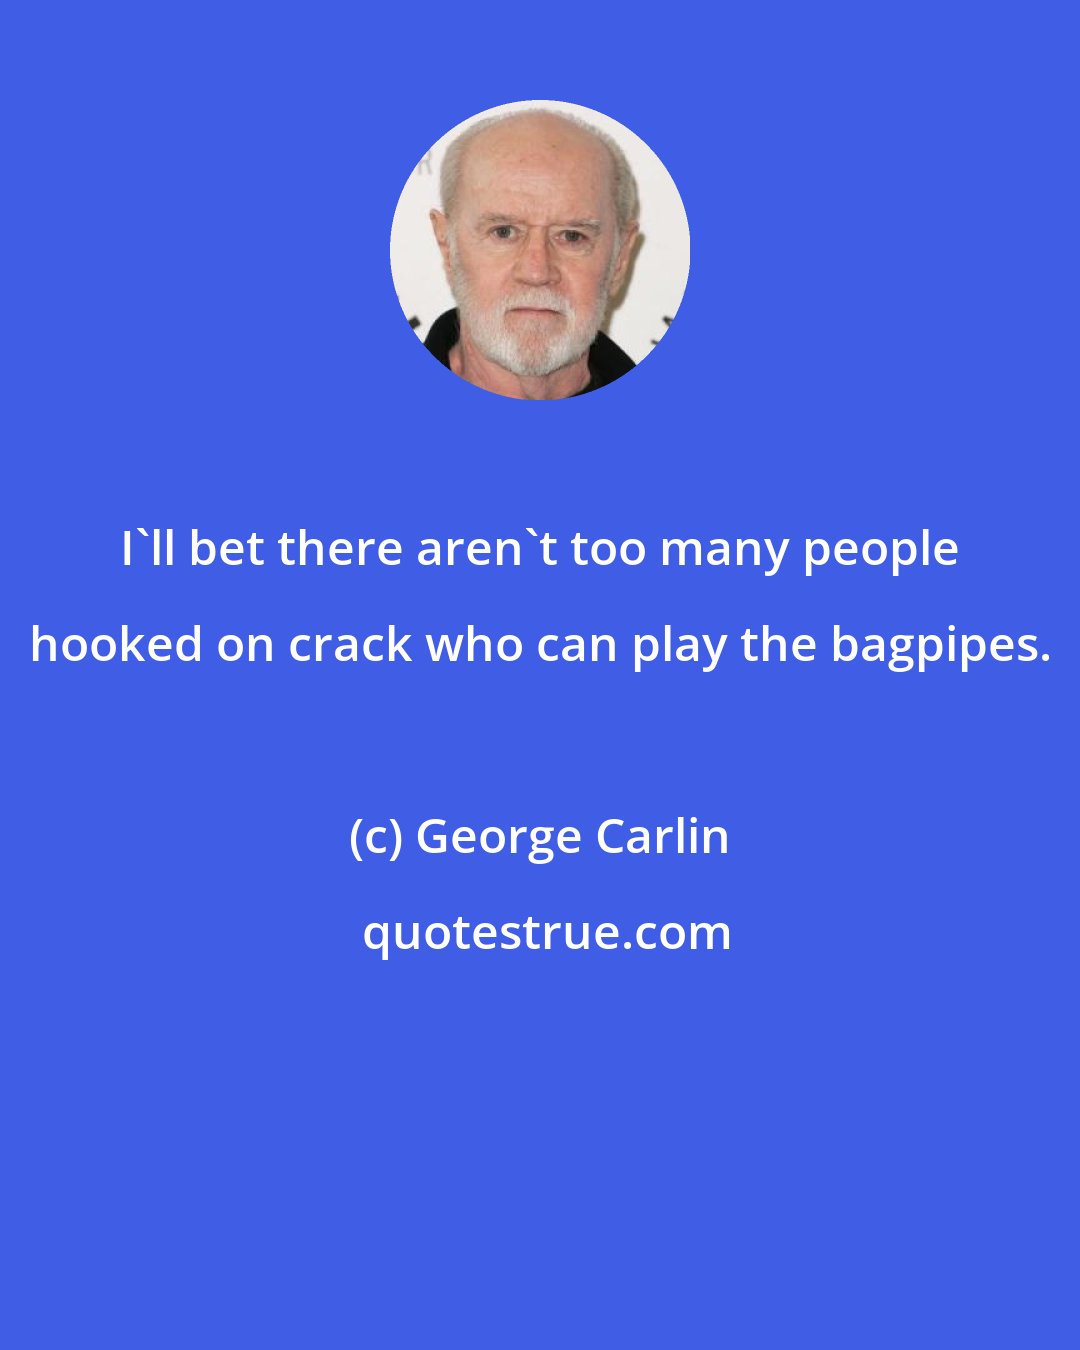 George Carlin: I'll bet there aren't too many people hooked on crack who can play the bagpipes.